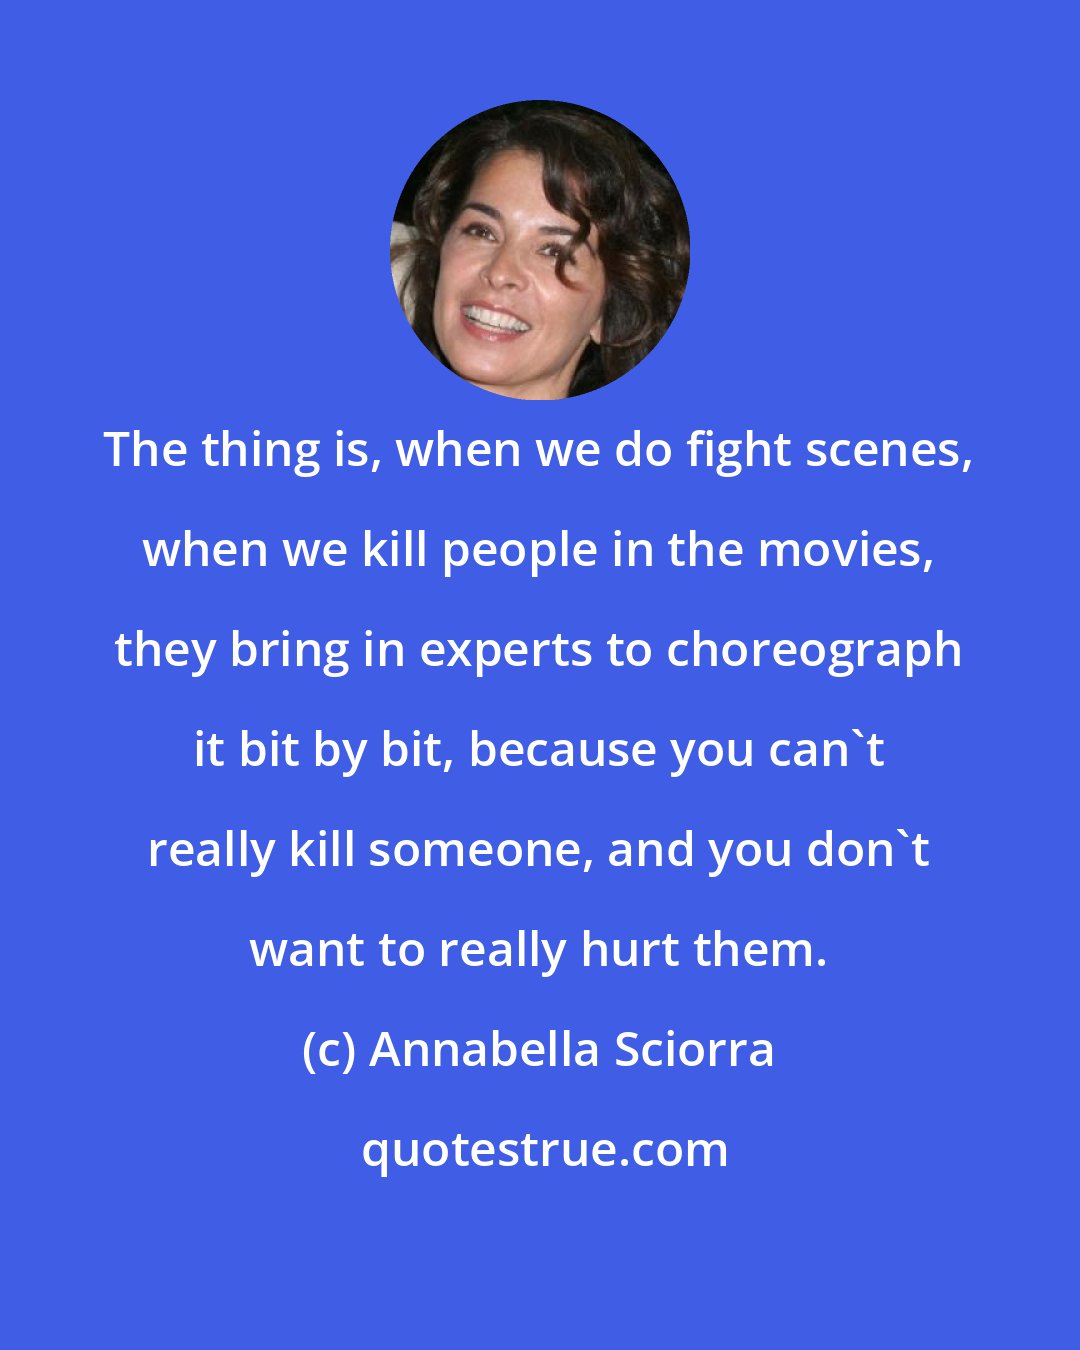 Annabella Sciorra: The thing is, when we do fight scenes, when we kill people in the movies, they bring in experts to choreograph it bit by bit, because you can't really kill someone, and you don't want to really hurt them.